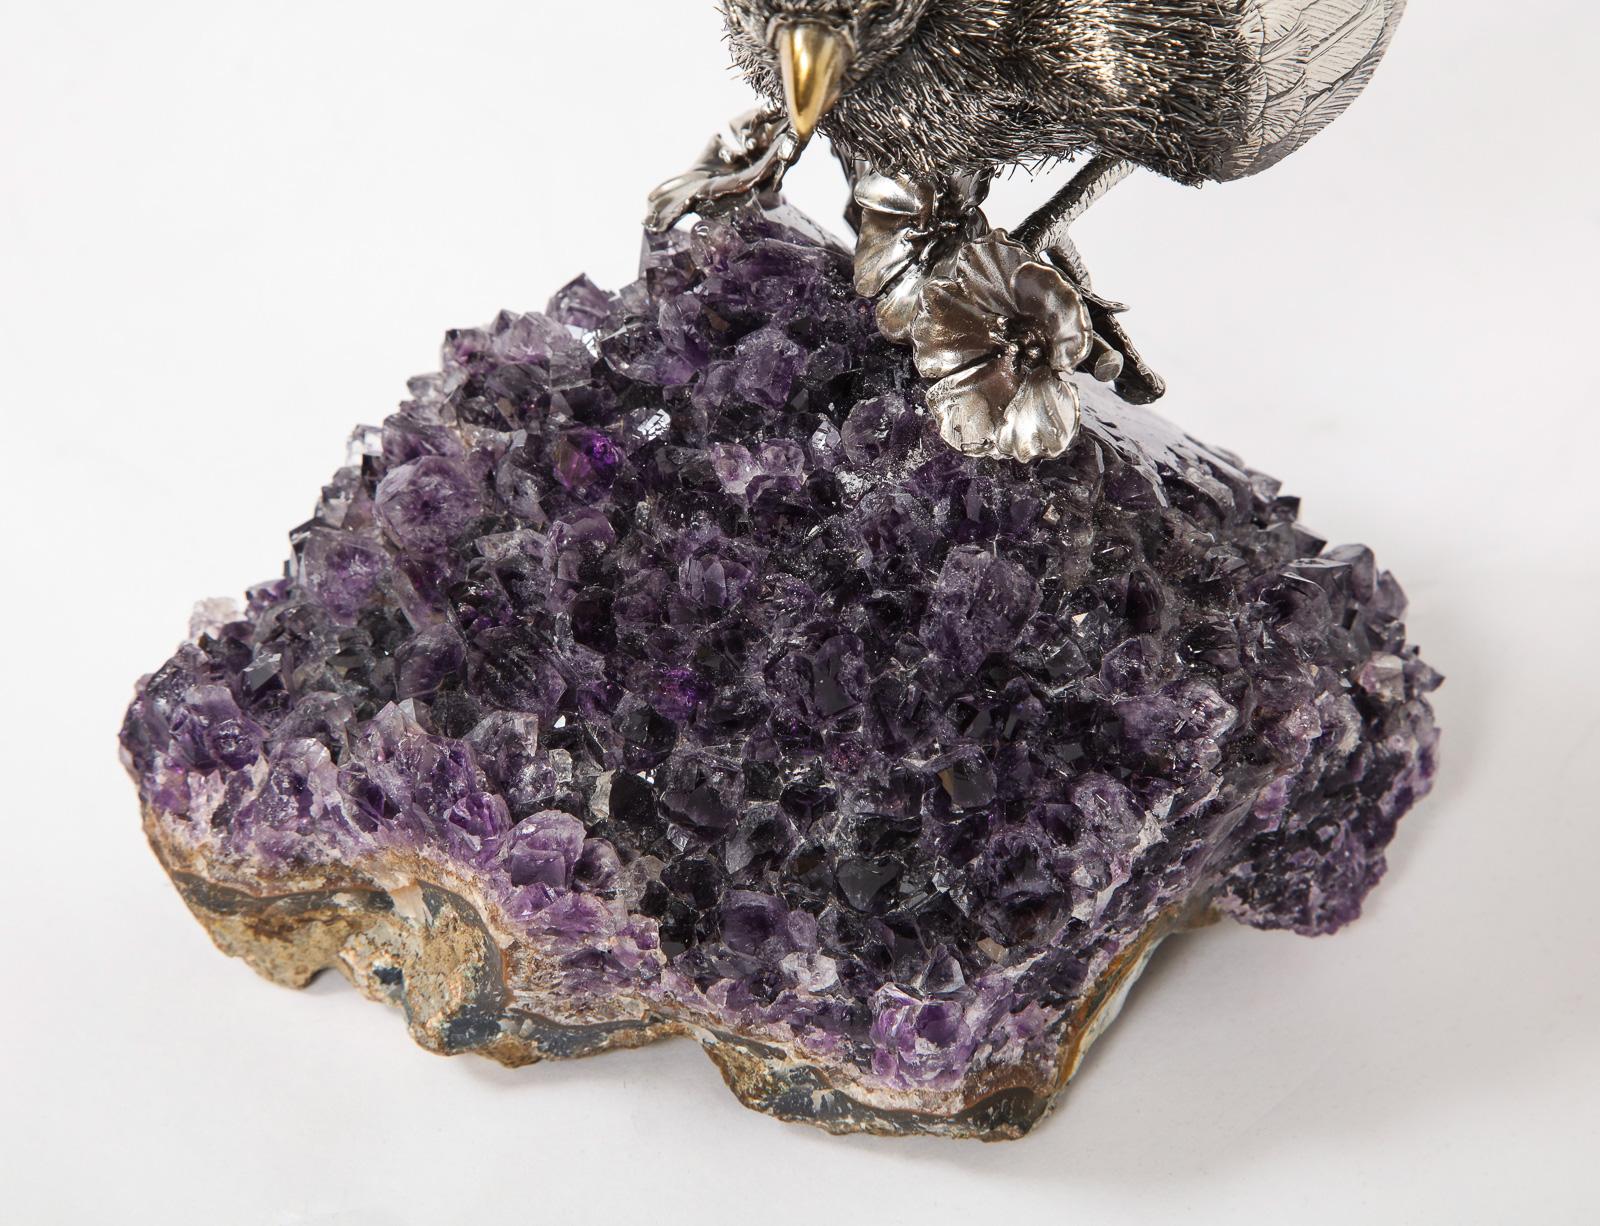 Mario Buccellati, an Exceptional Italian Silver Parrot on Amethyst 13